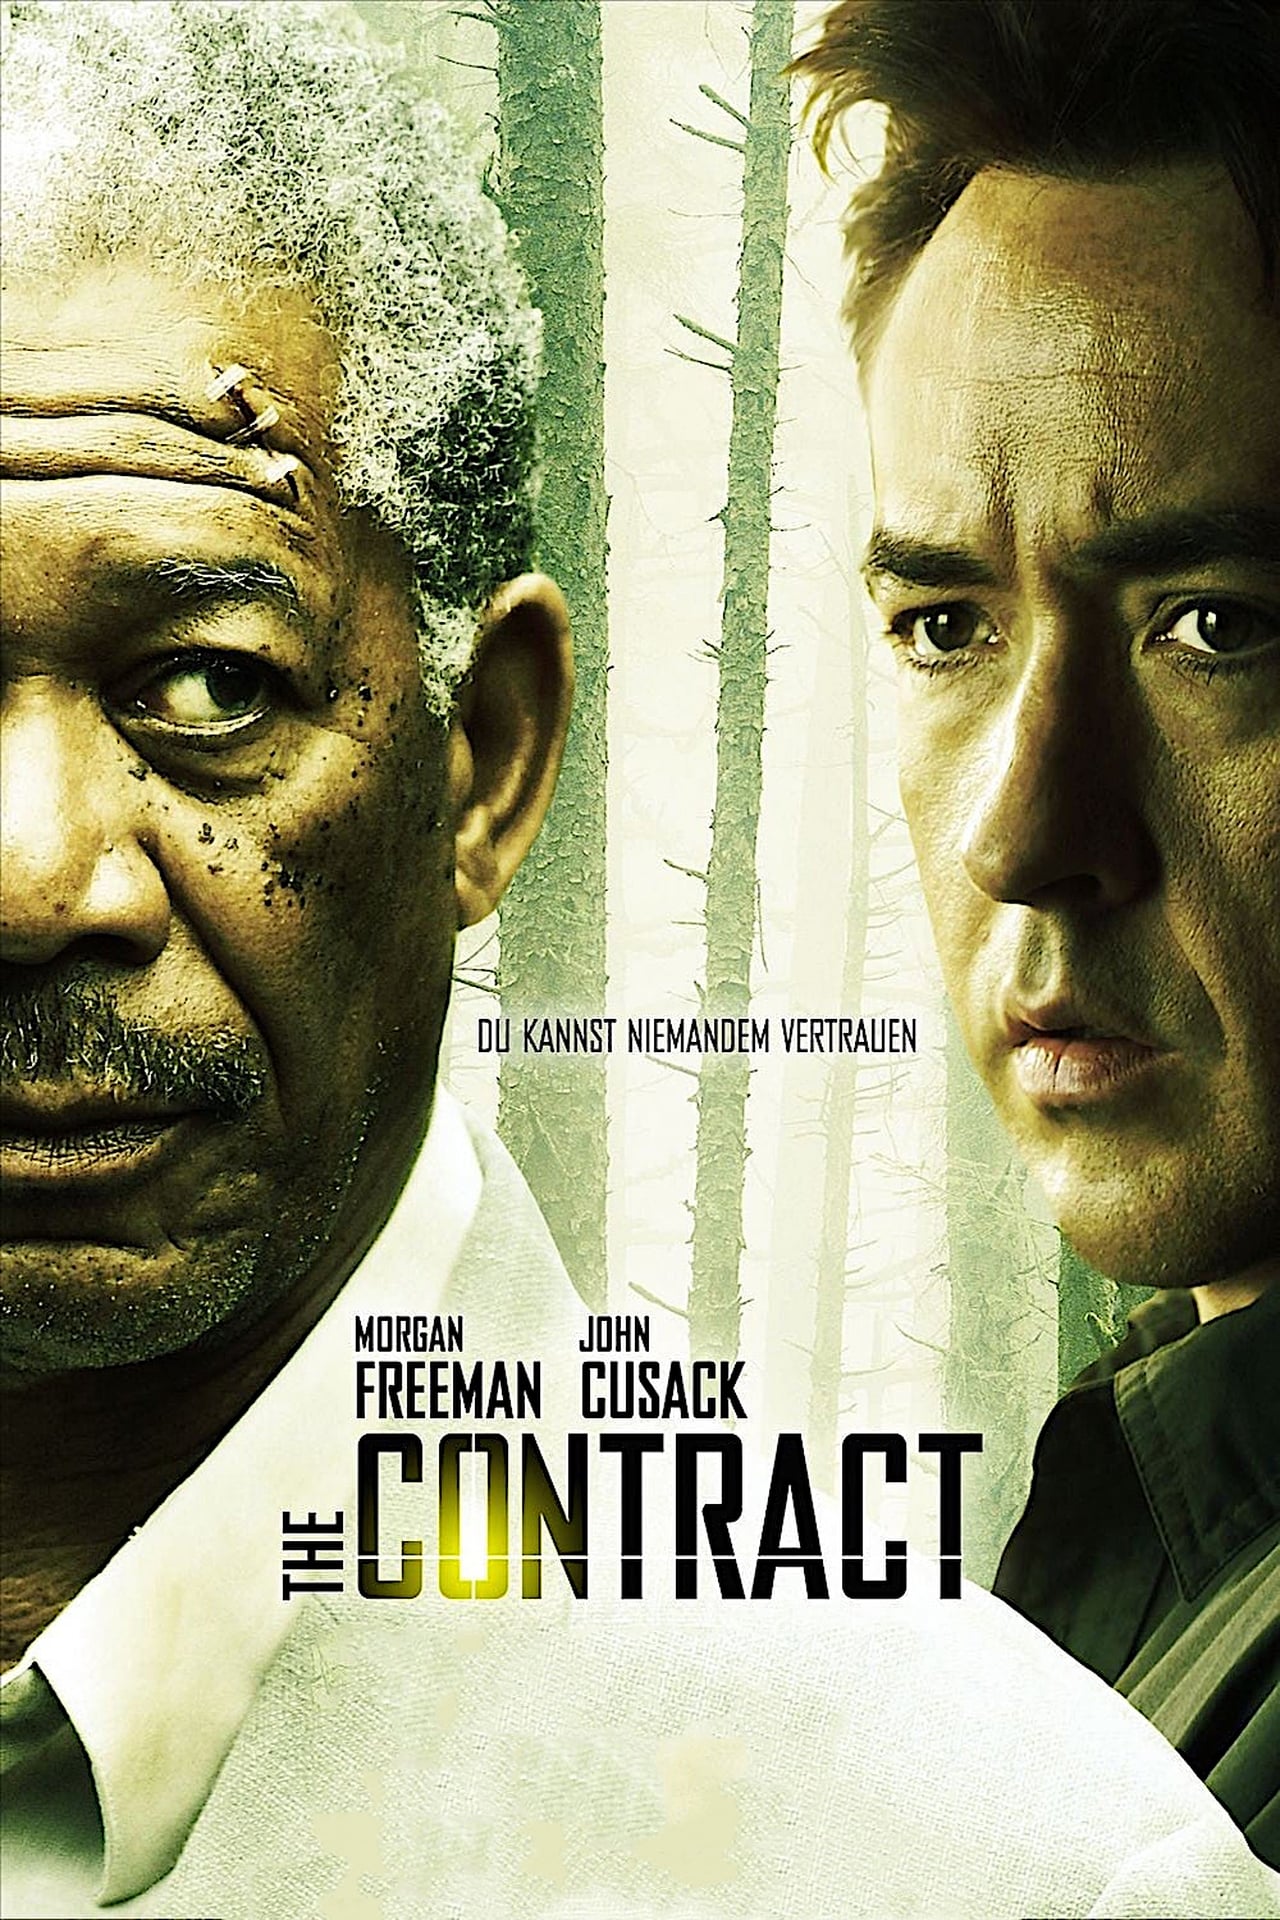 The Contract (2006) 5508Kbps 23.976Fps 48Khz BluRay DTS-HD MA 7.1Ch Turkish Audio TAC